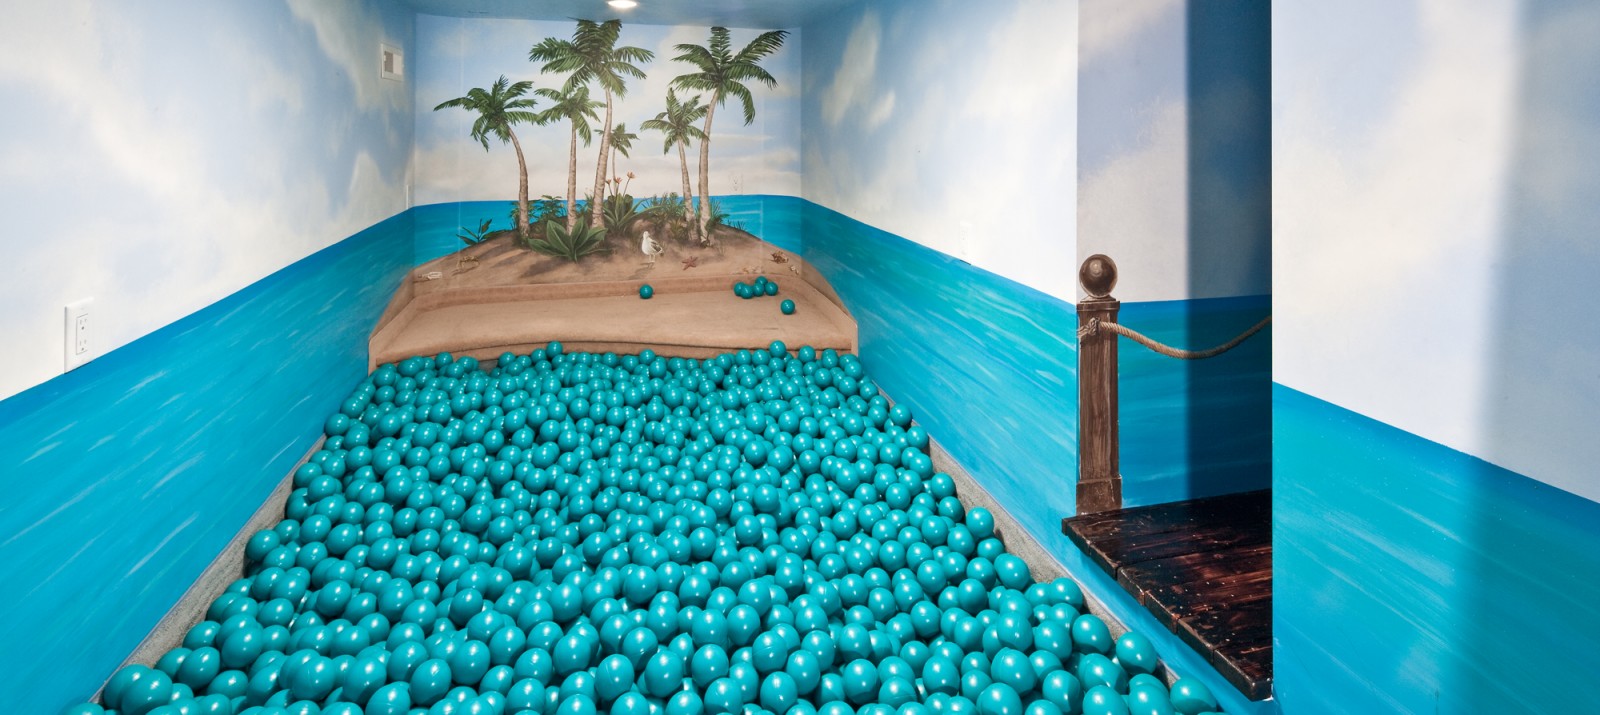 An indoor ball pit that looks like a tropical island.